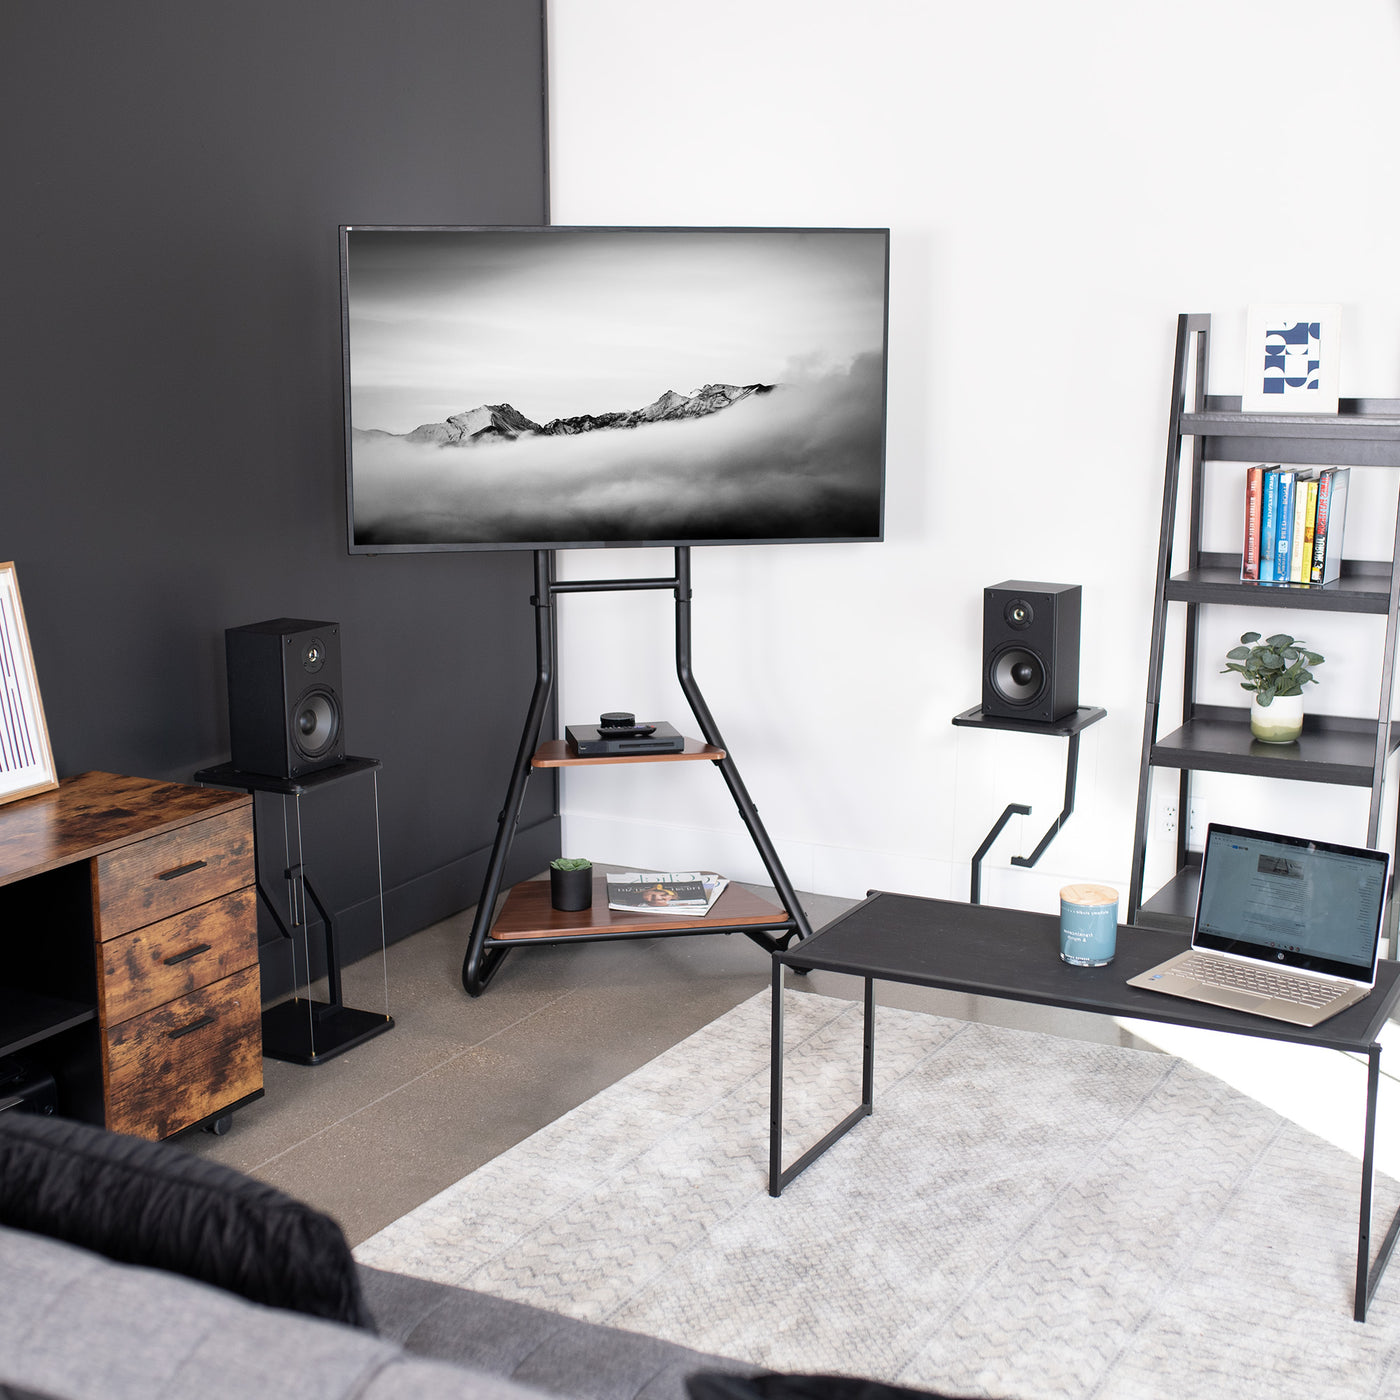  A modern living space with a corner of the room TV stand, anti-gravity speaker stands, and a minimalist coffee table.